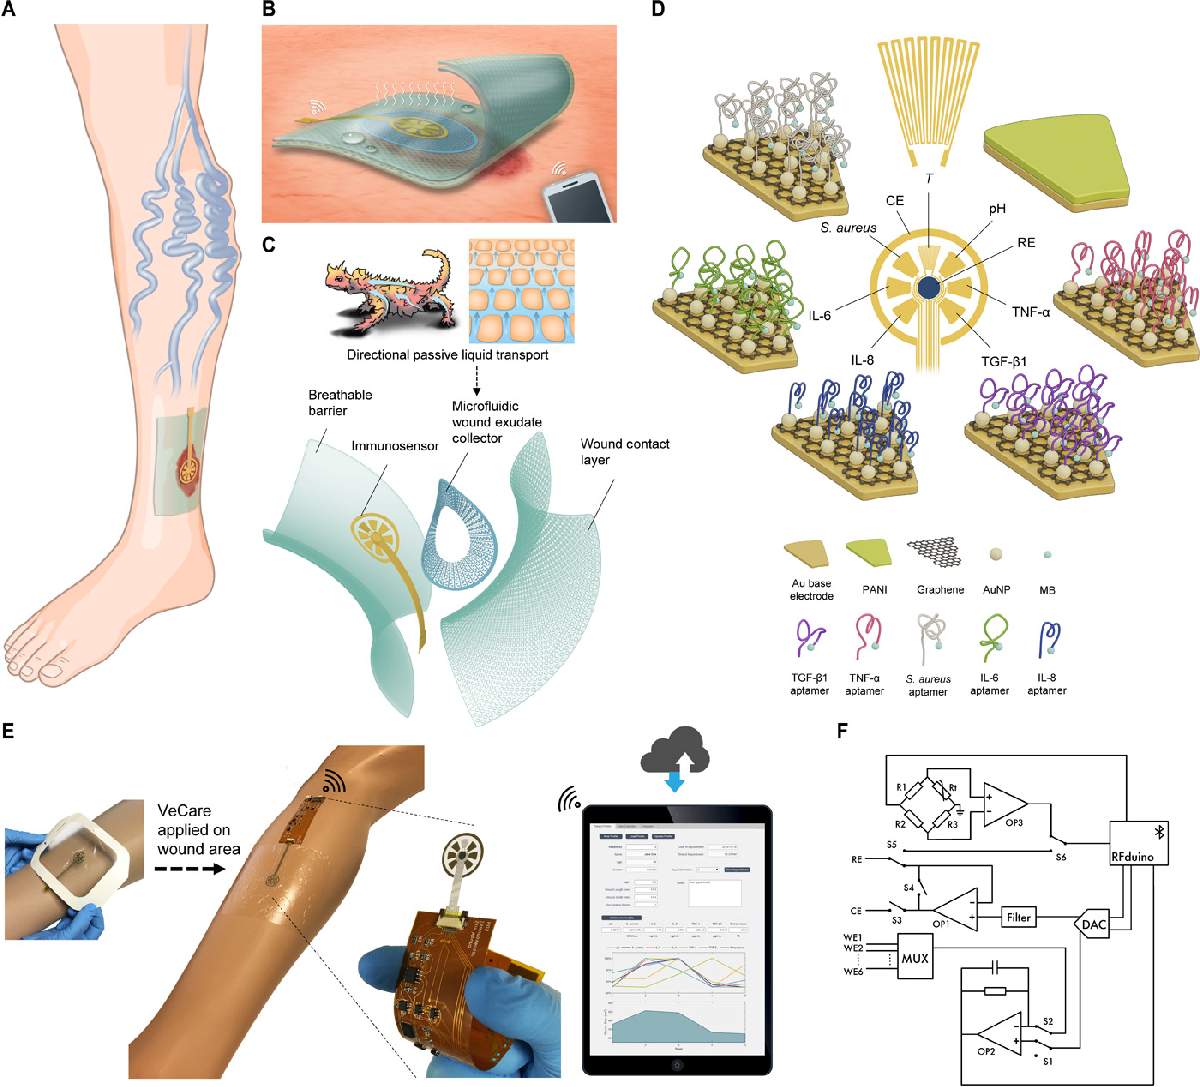 Illustration-of-how-immunosensing-system-works-for-chronic-wound-monitoring